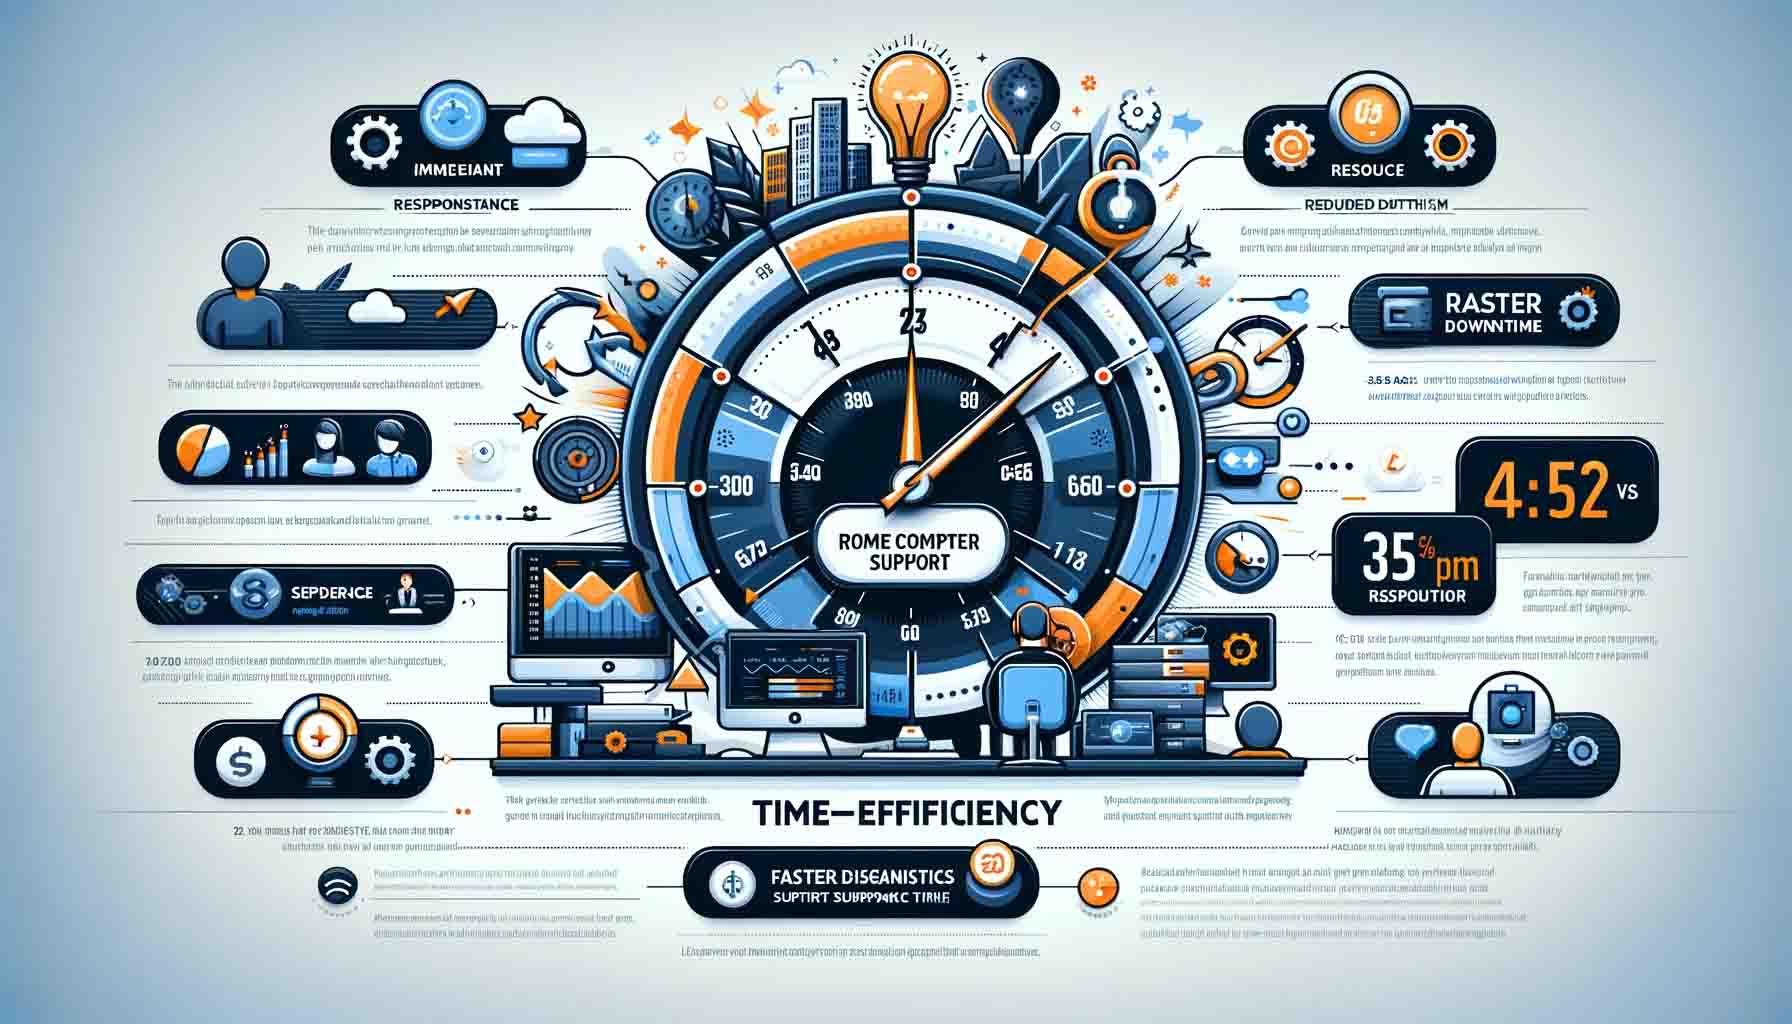 The infographic effectively highlights the time-efficiency aspect of Remote Computer Support, visually representing the speed of response and resolution times in comparison to traditional support methods.